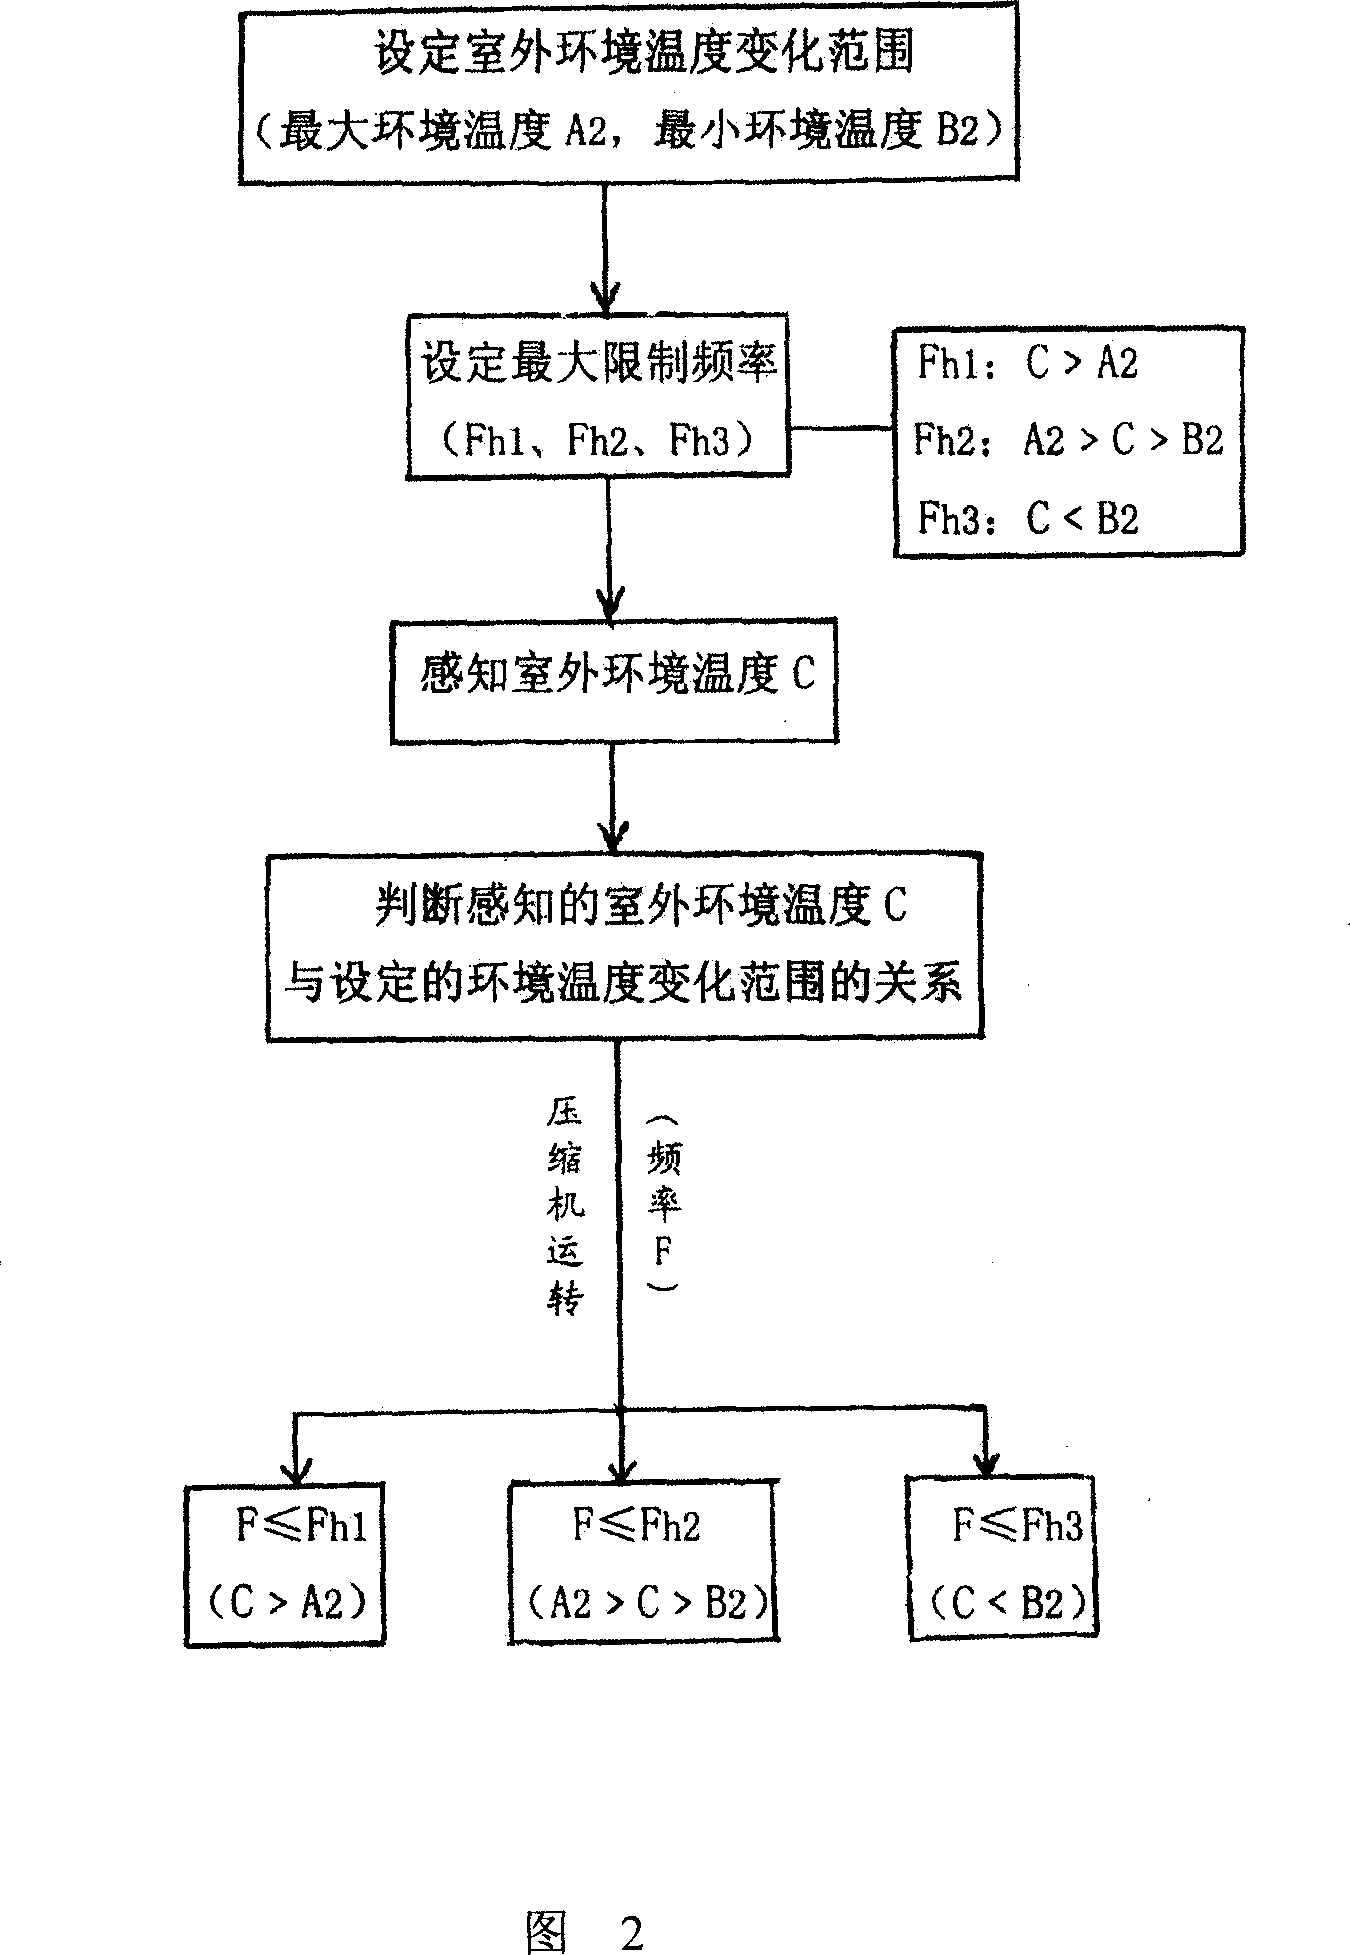 Method for limiting inverter compressor maximum frequency according to outdoor environment temperature